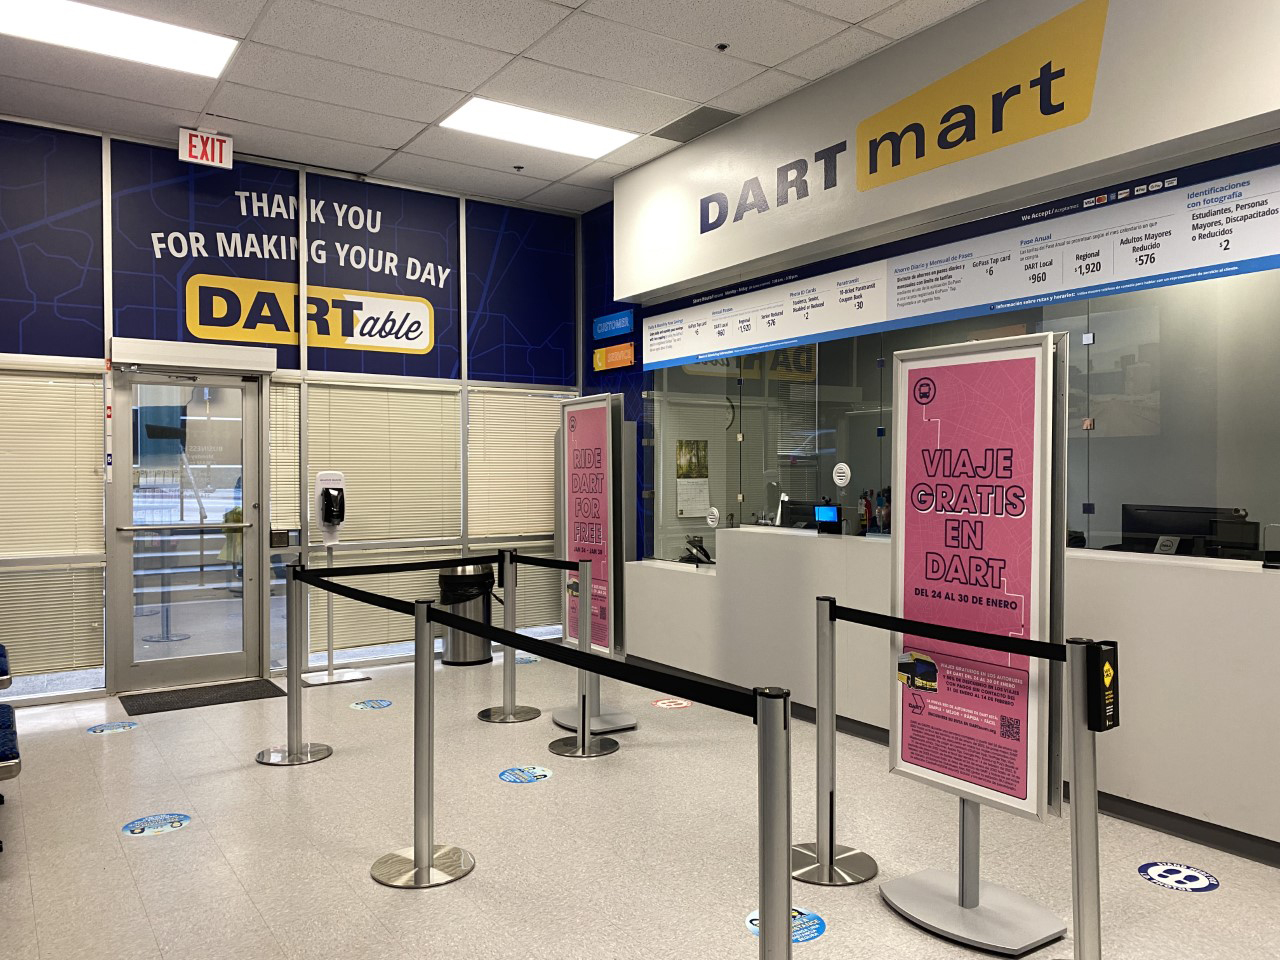 DARTmart and Lost and Found are closed Feb 3-4